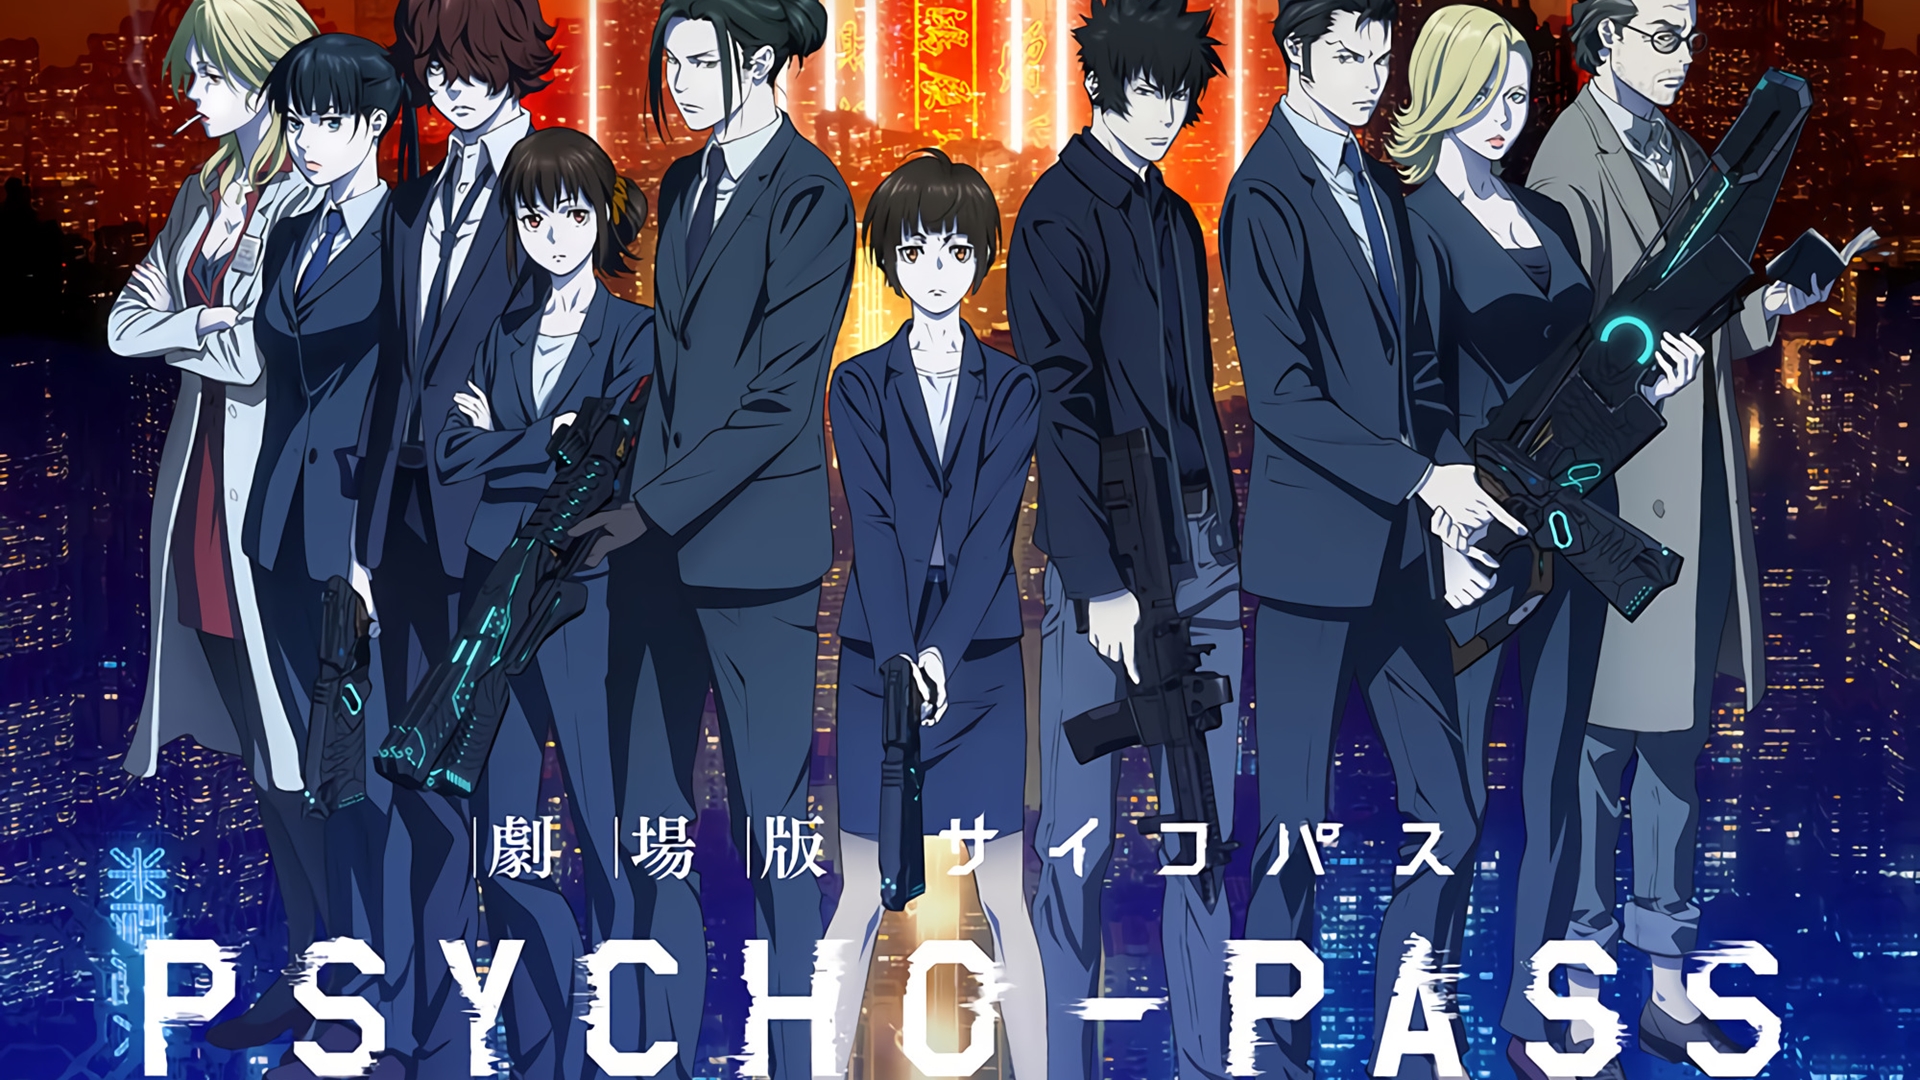 Sword Art Online,' 'Laid-Back Camp' & 'Psycho-Pass' Movies Join Crunchyroll  in November